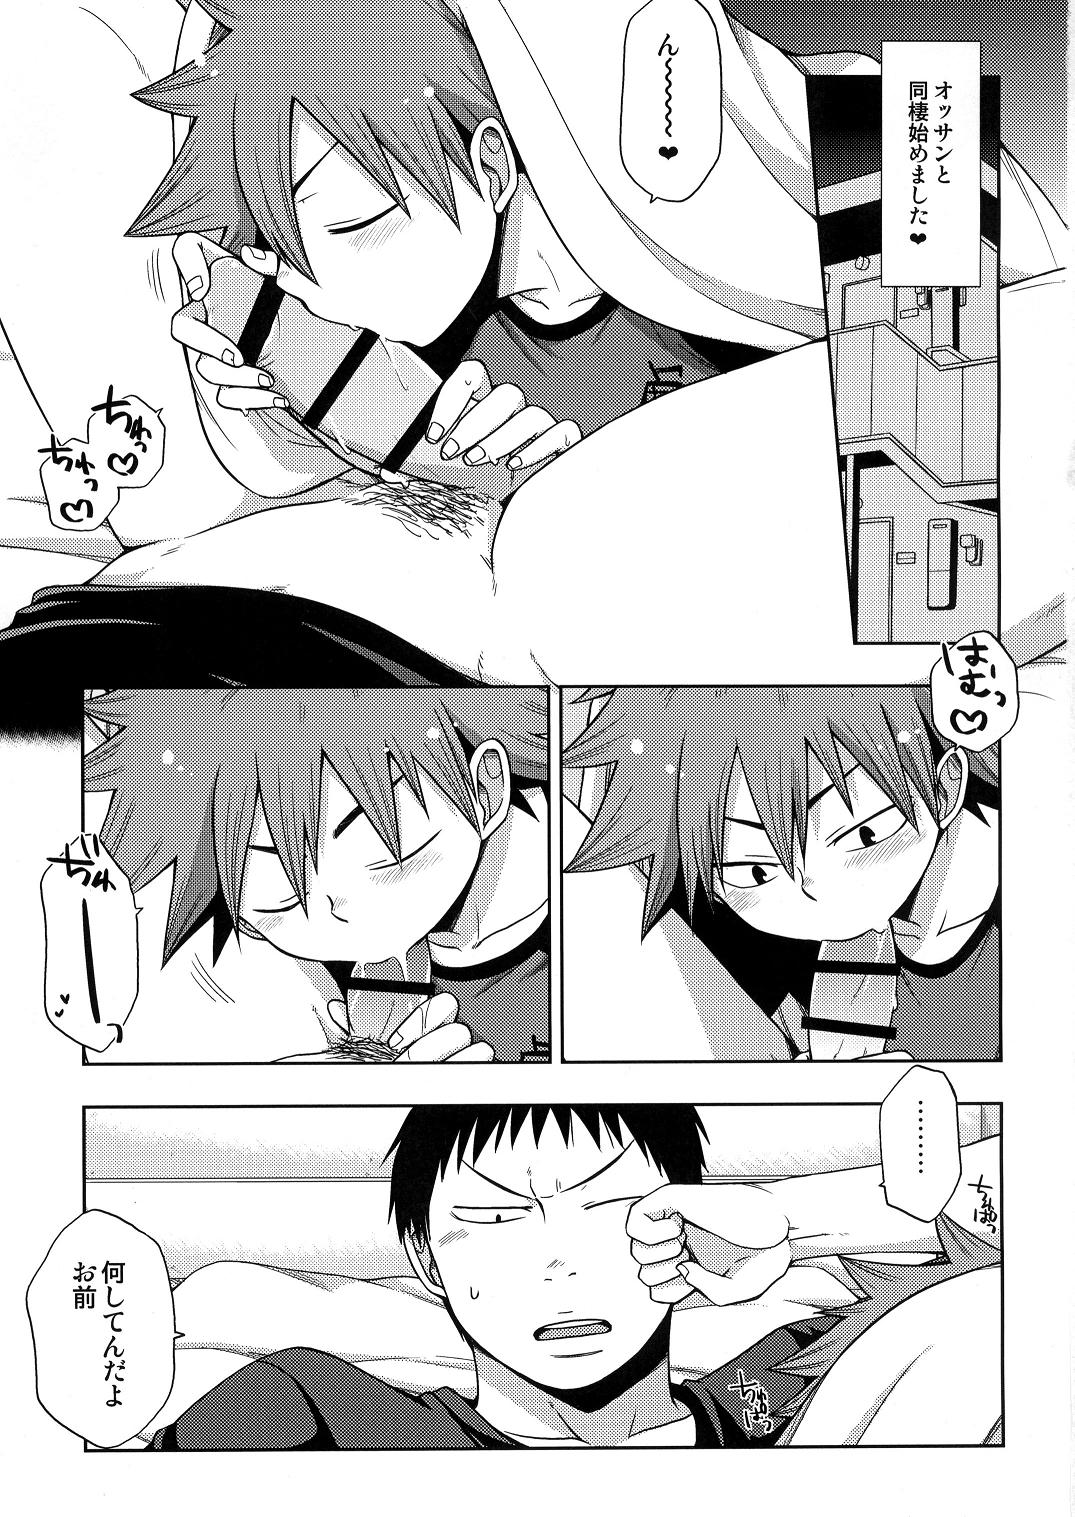 Swing Mischief - Yowamushi pedal Mexican - Page 2